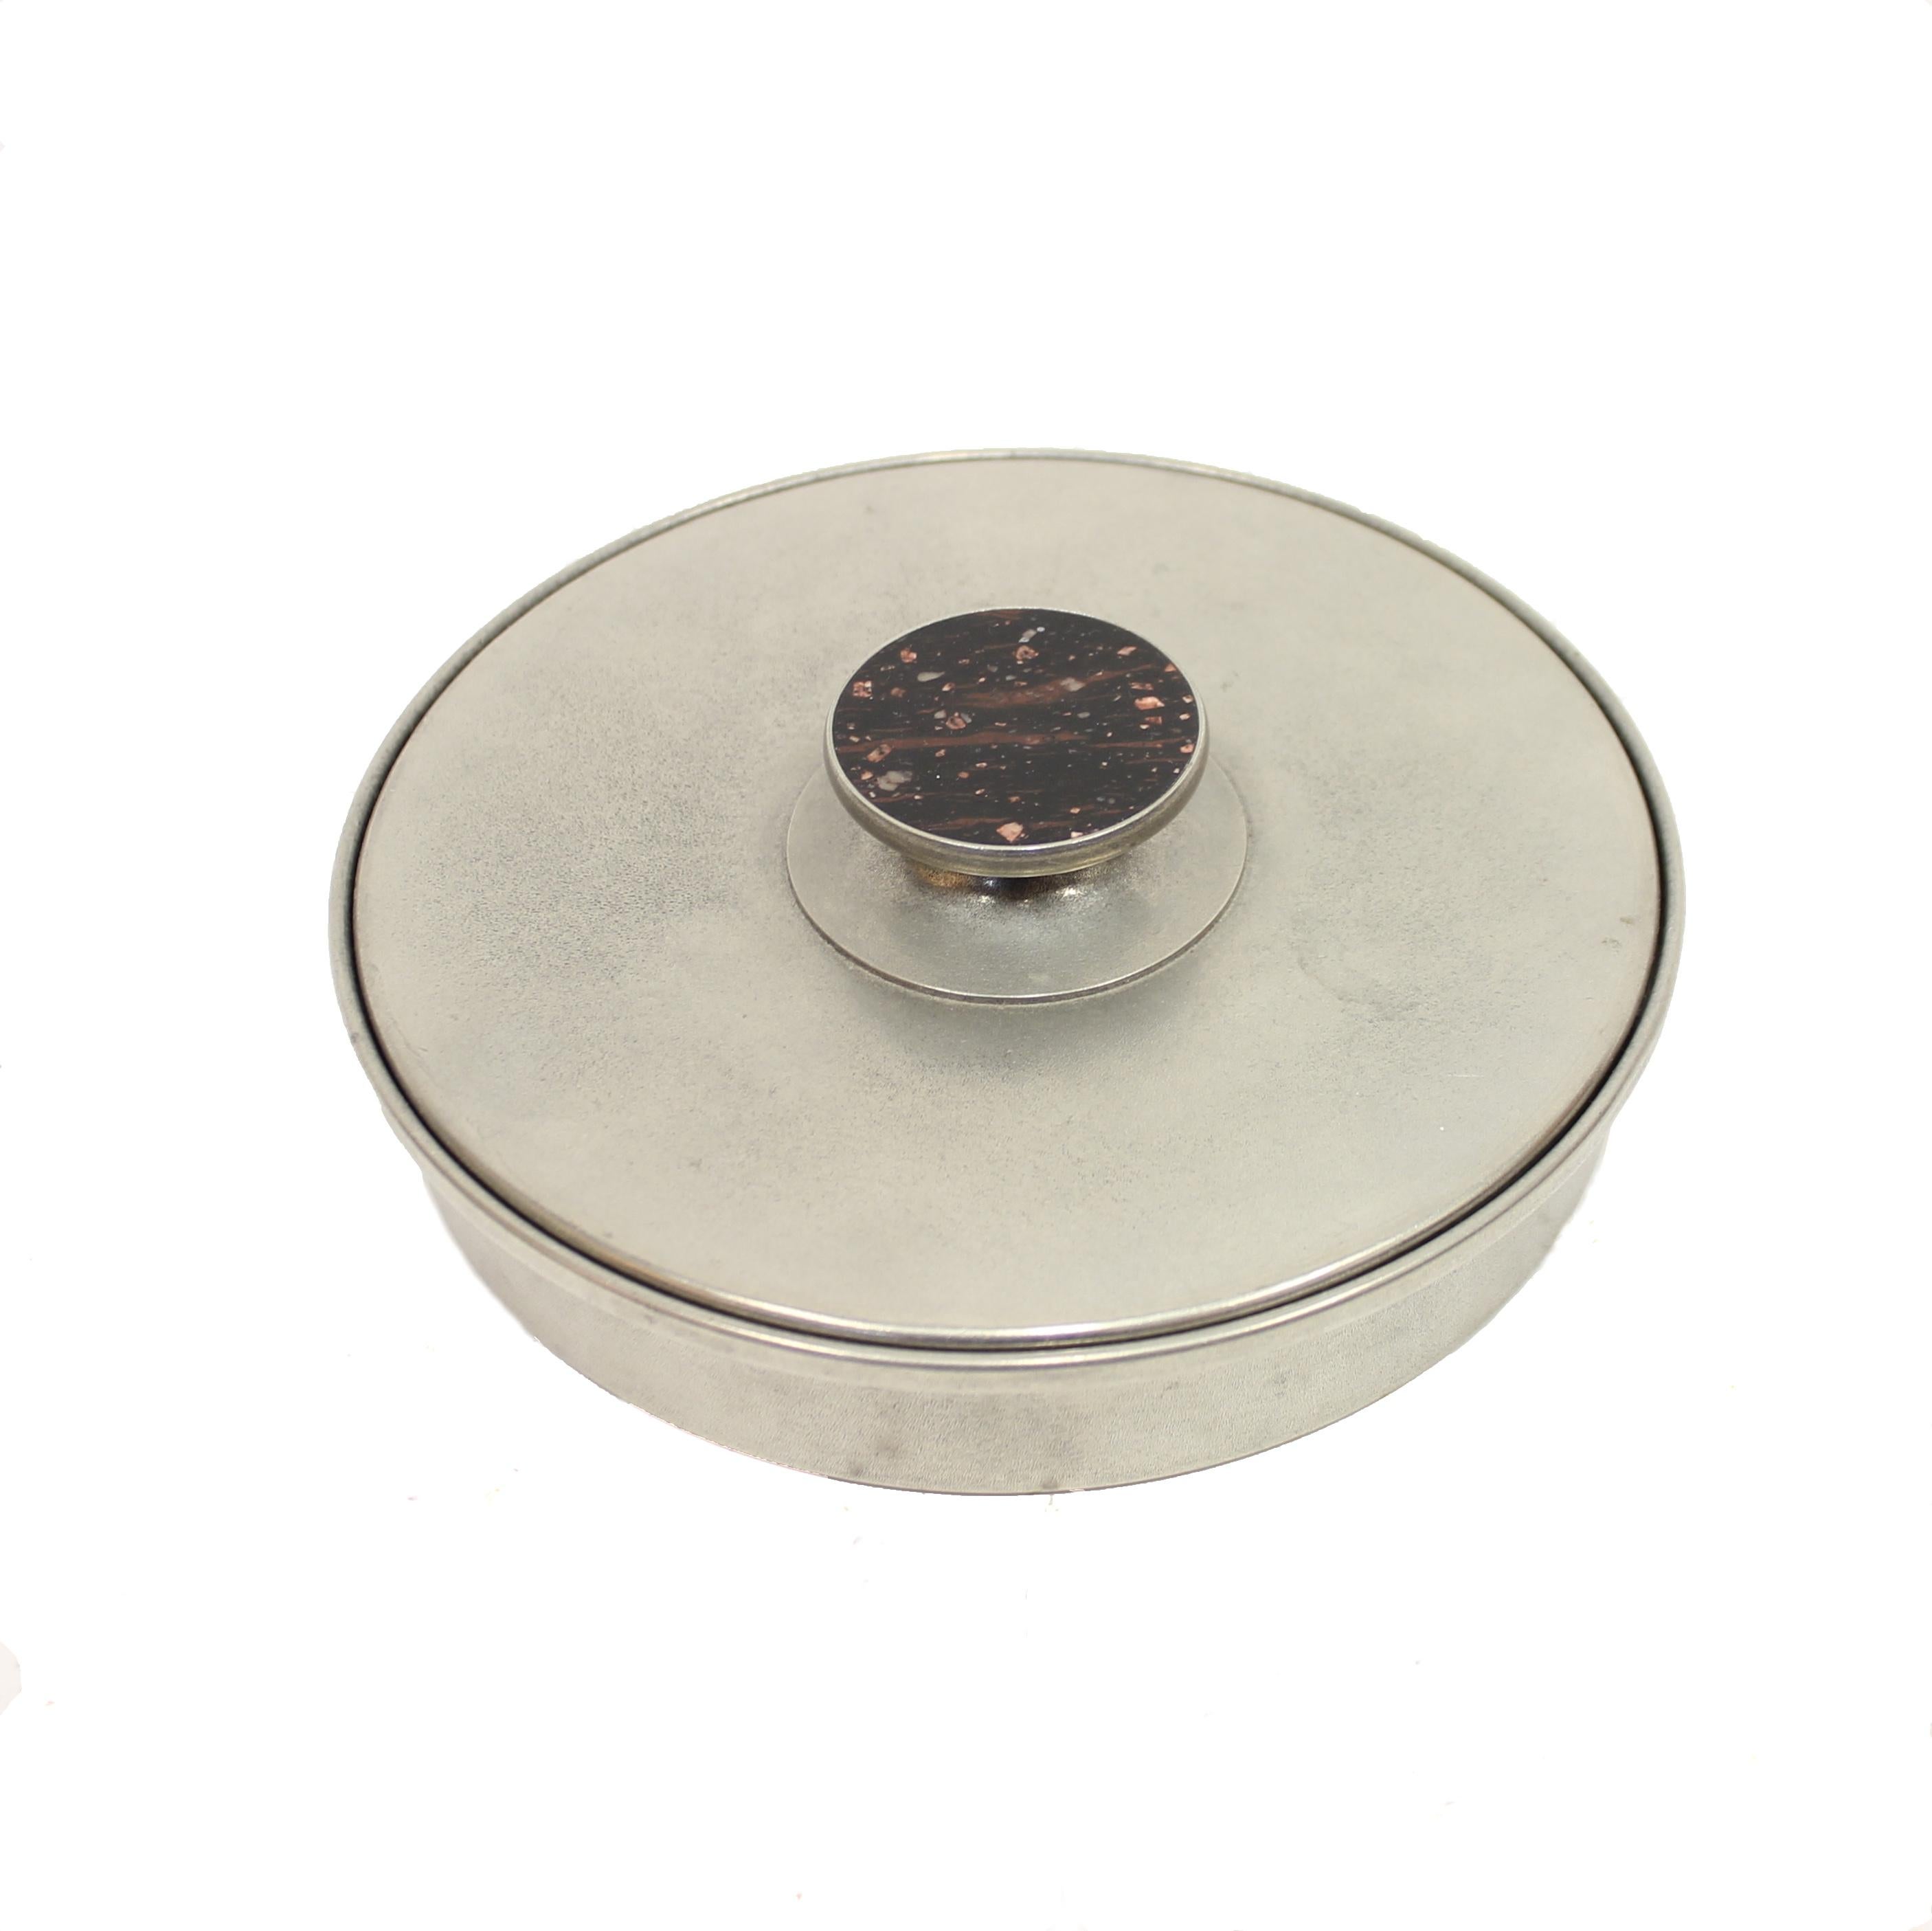 Swedish pewter jewelry box with Porphyry stone handle made by Swedish company Stenlya in 1974. Porphyry (Porfyr in Swedish) is also called 